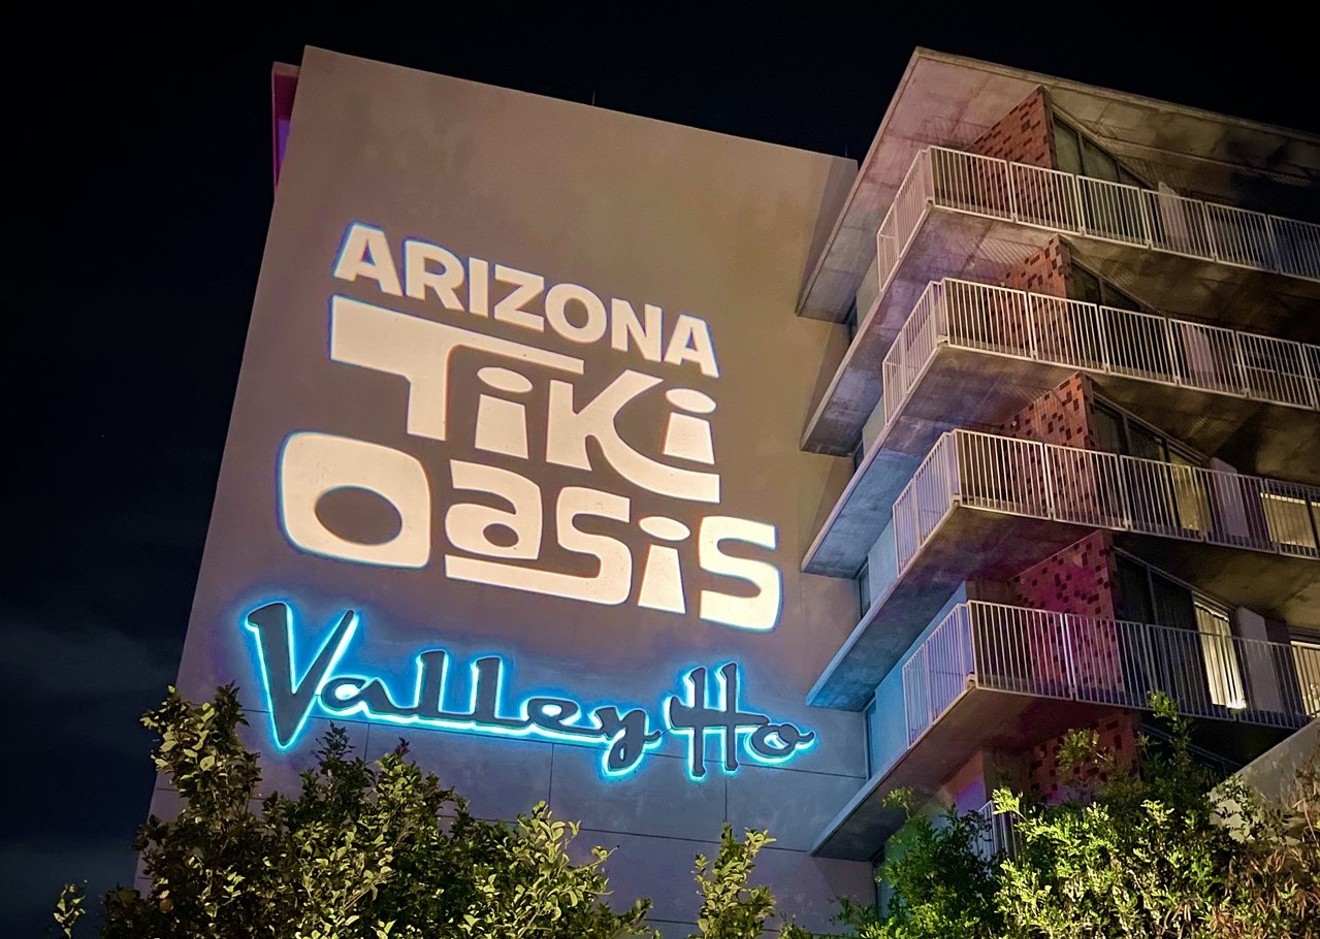 Hotel Valley Ho will be taken over by tiki fans this weekend.